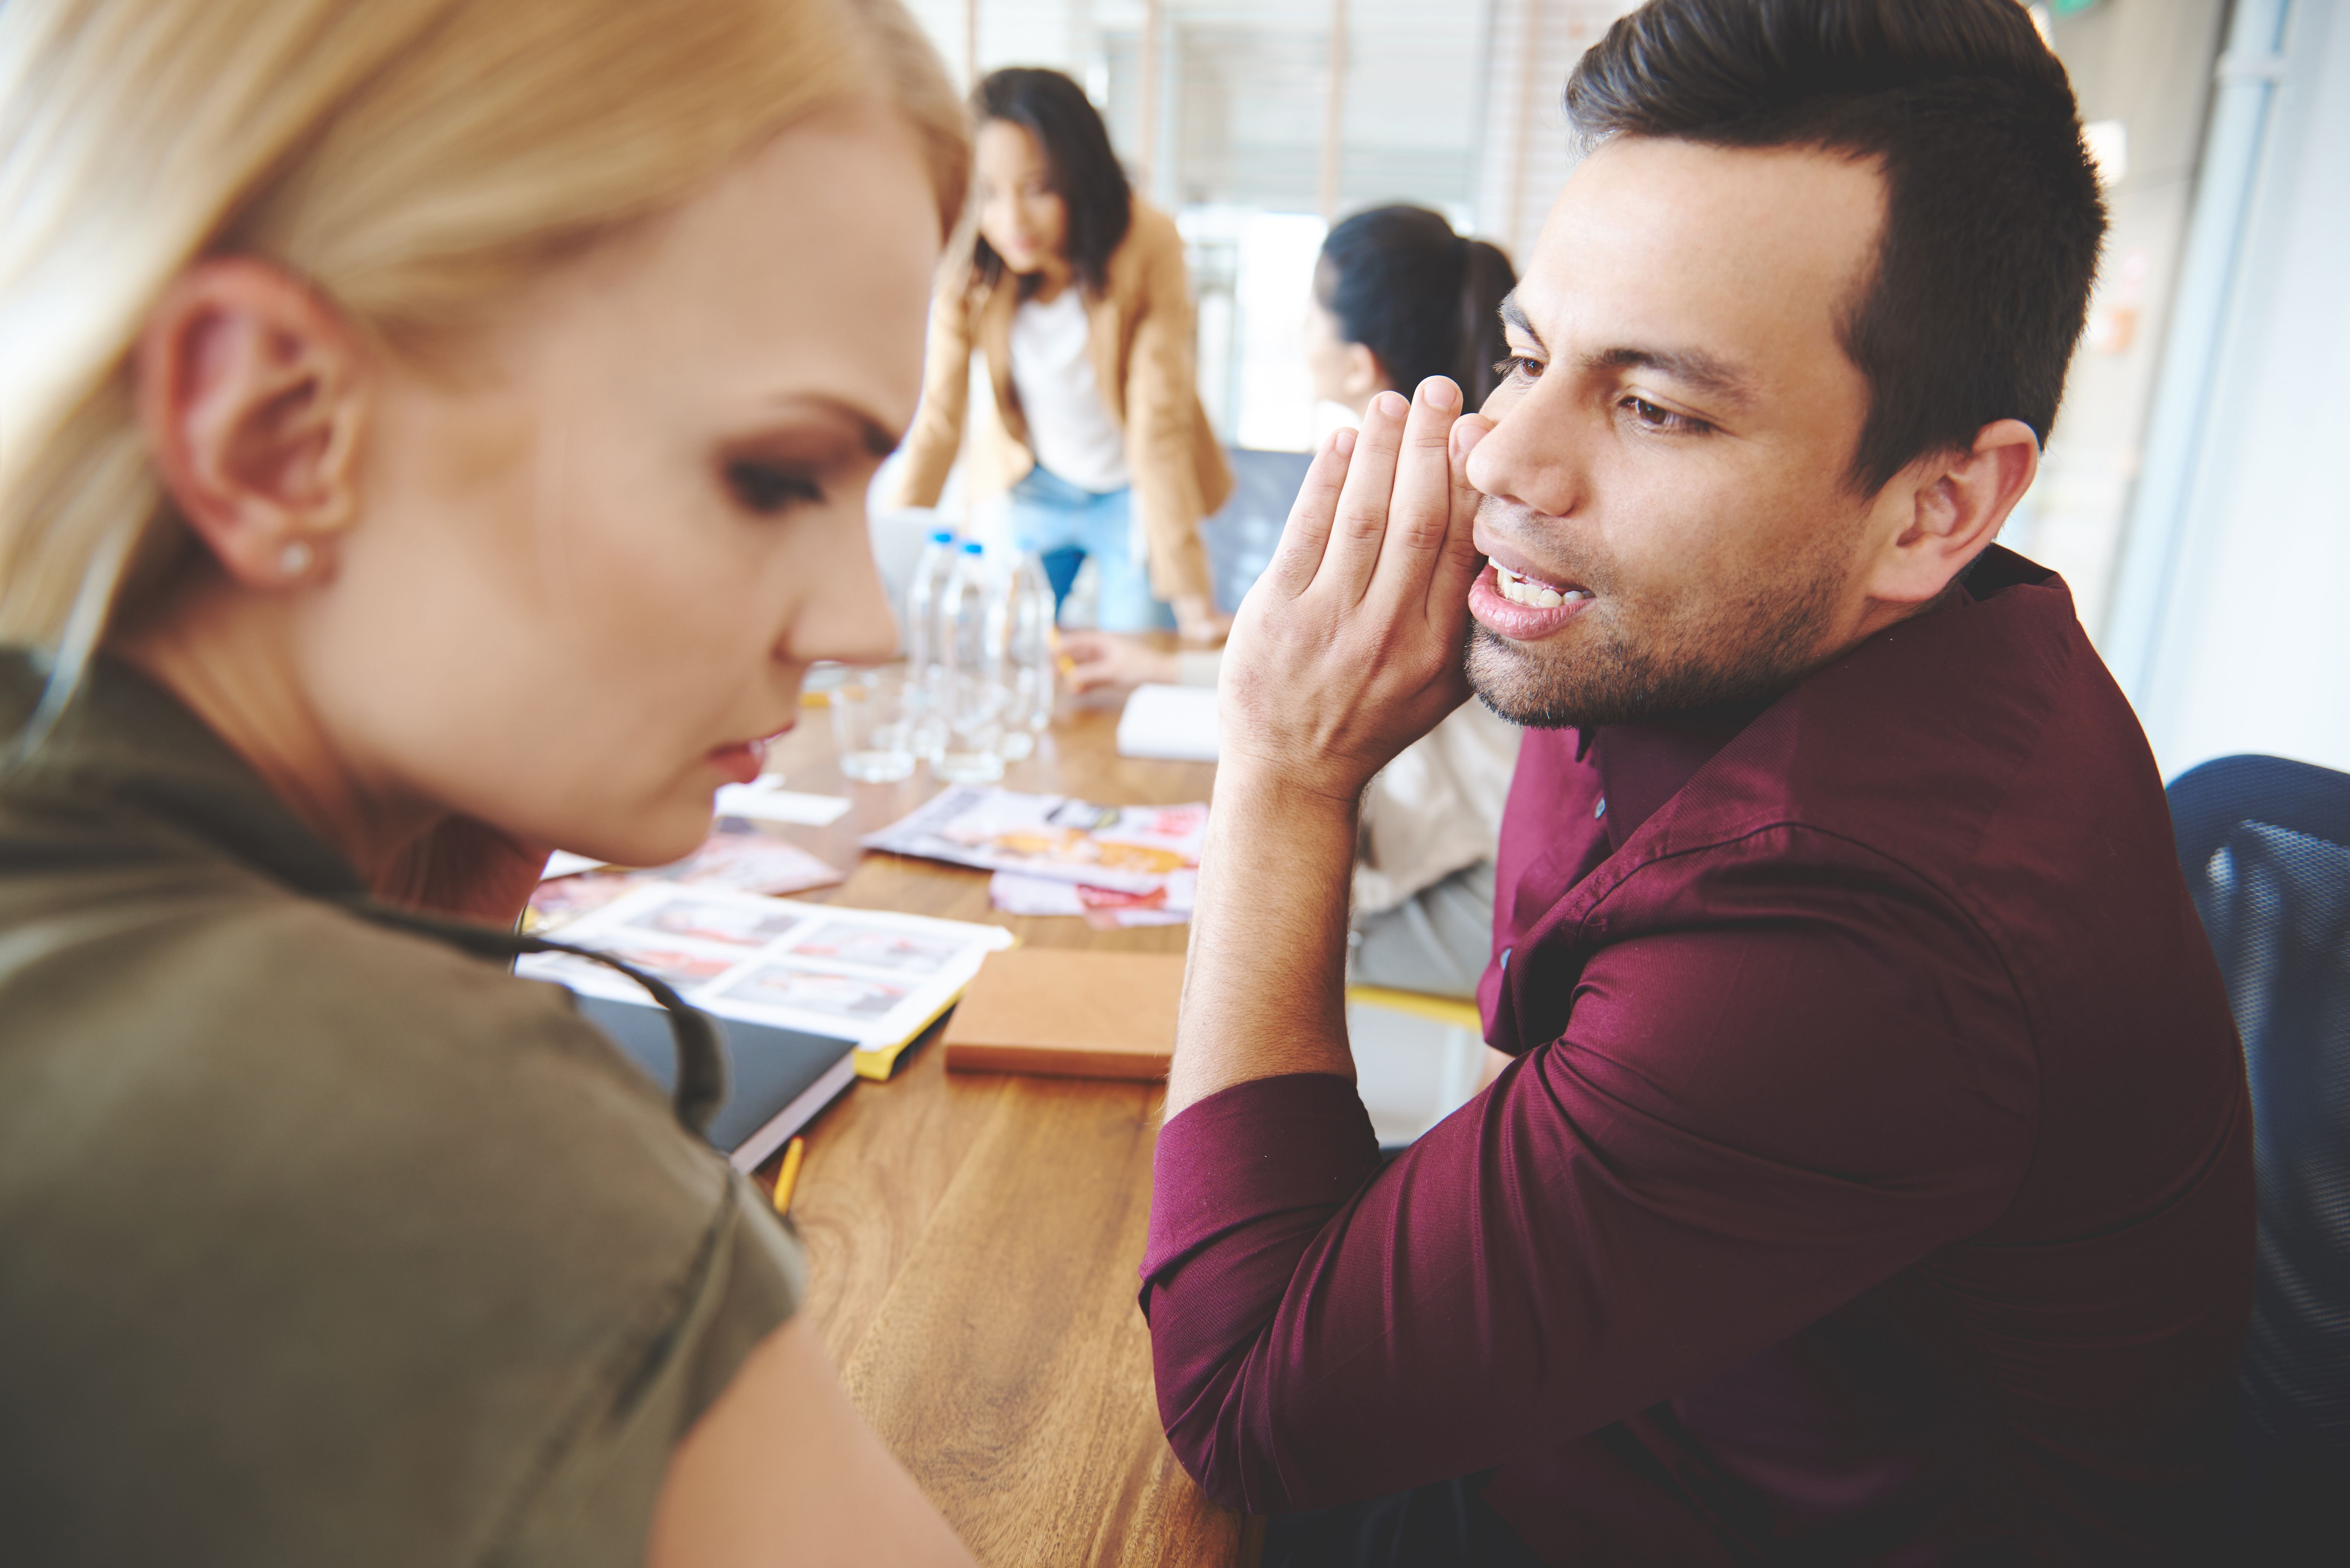 Co-workers whispering during a meeting at work. | Source: Shutterstock